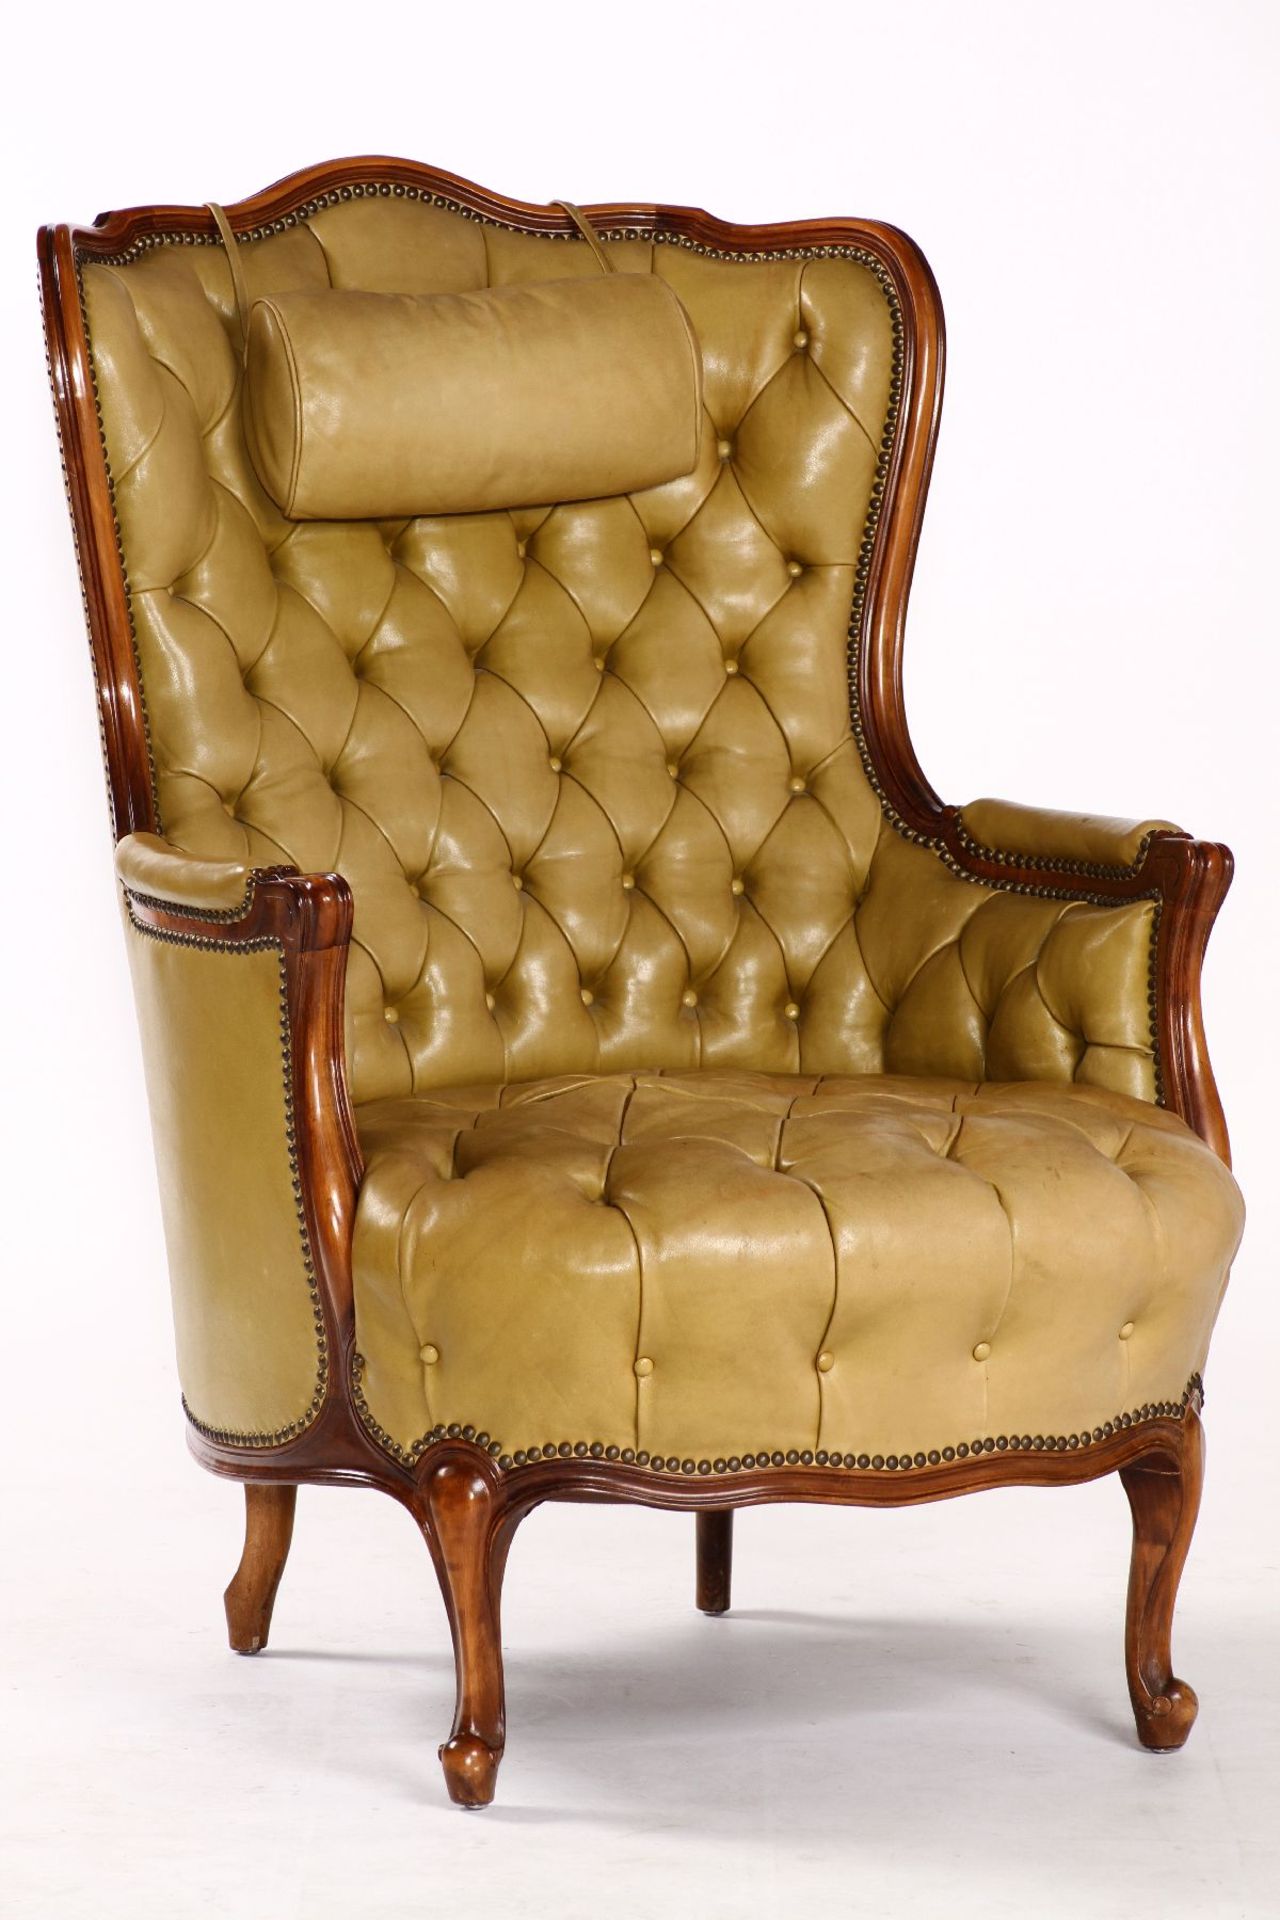 Wingback armchair, after engl. prototype from 1870/80, solid walnut frame, yellow-green or olive